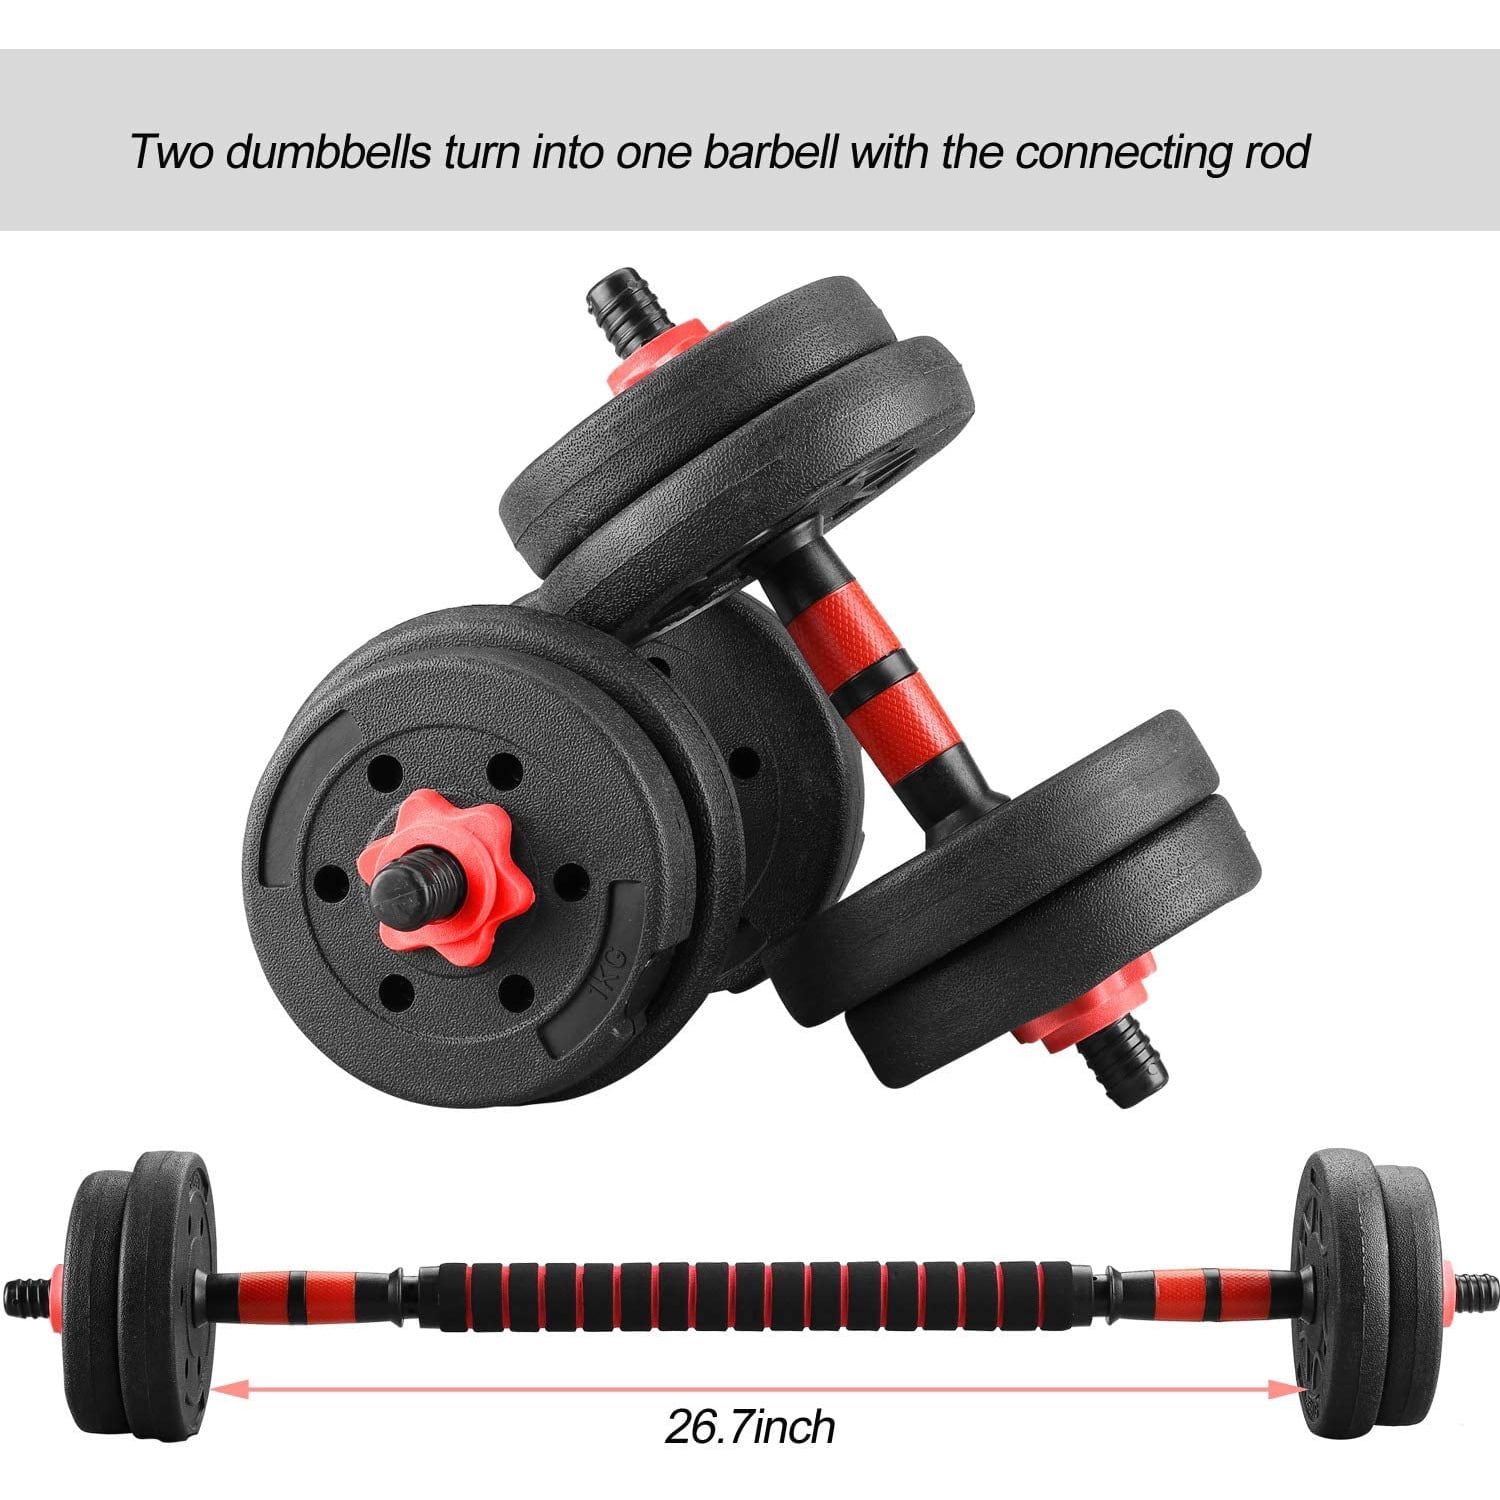 Details about   Adjustable Weight Dumbbell Barbell Kit 66LB/ 88LB /110LB Home Workout Equipment. 